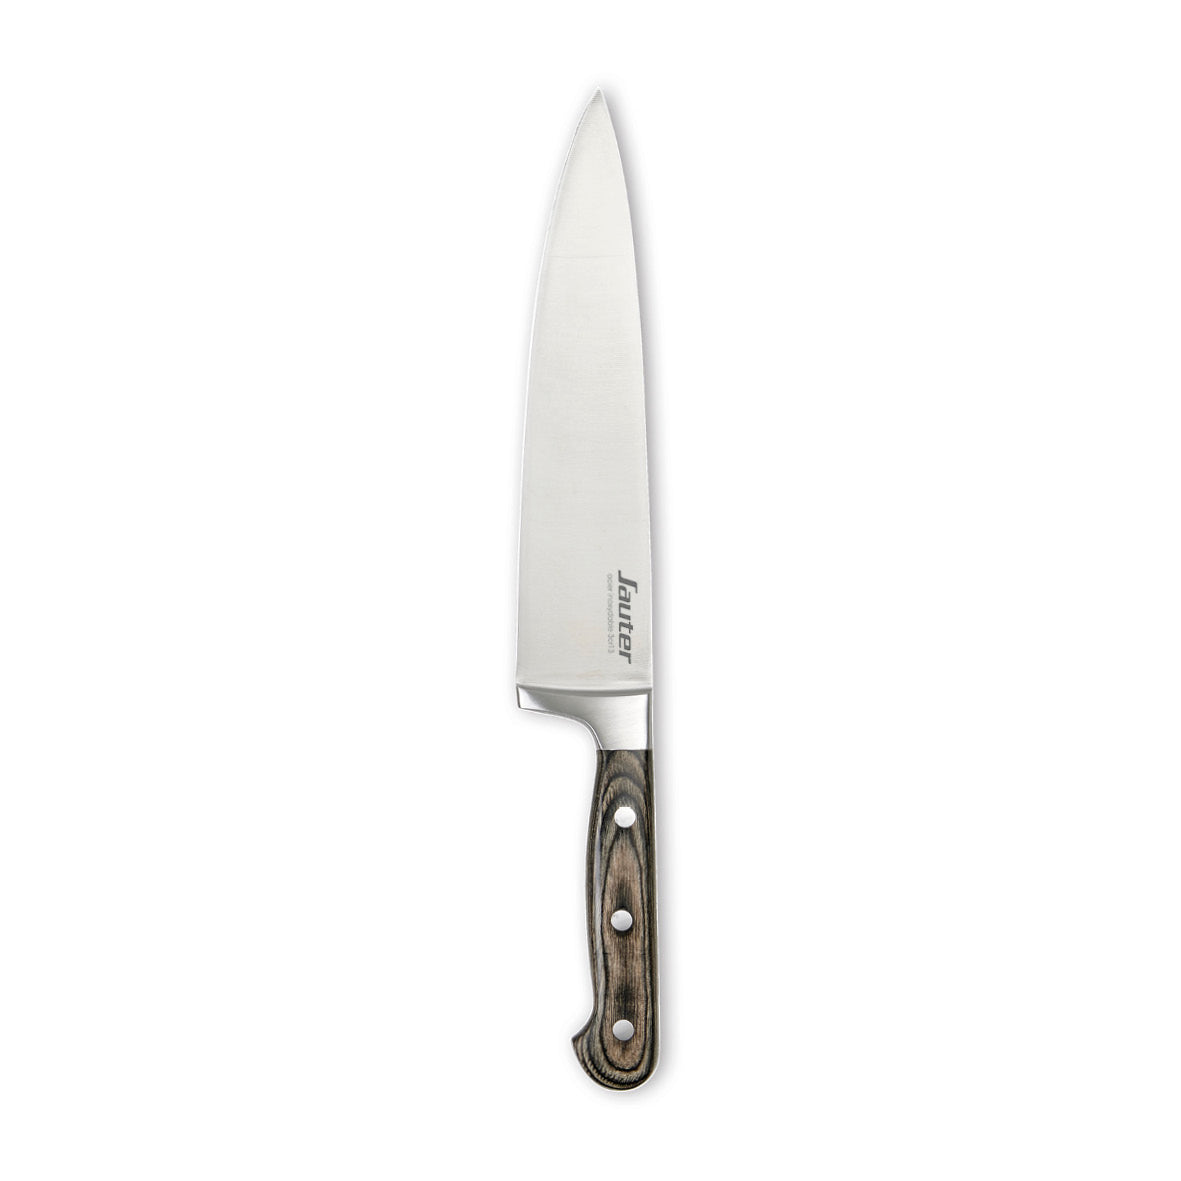 Chef's knife with wooden handle - Dark grey